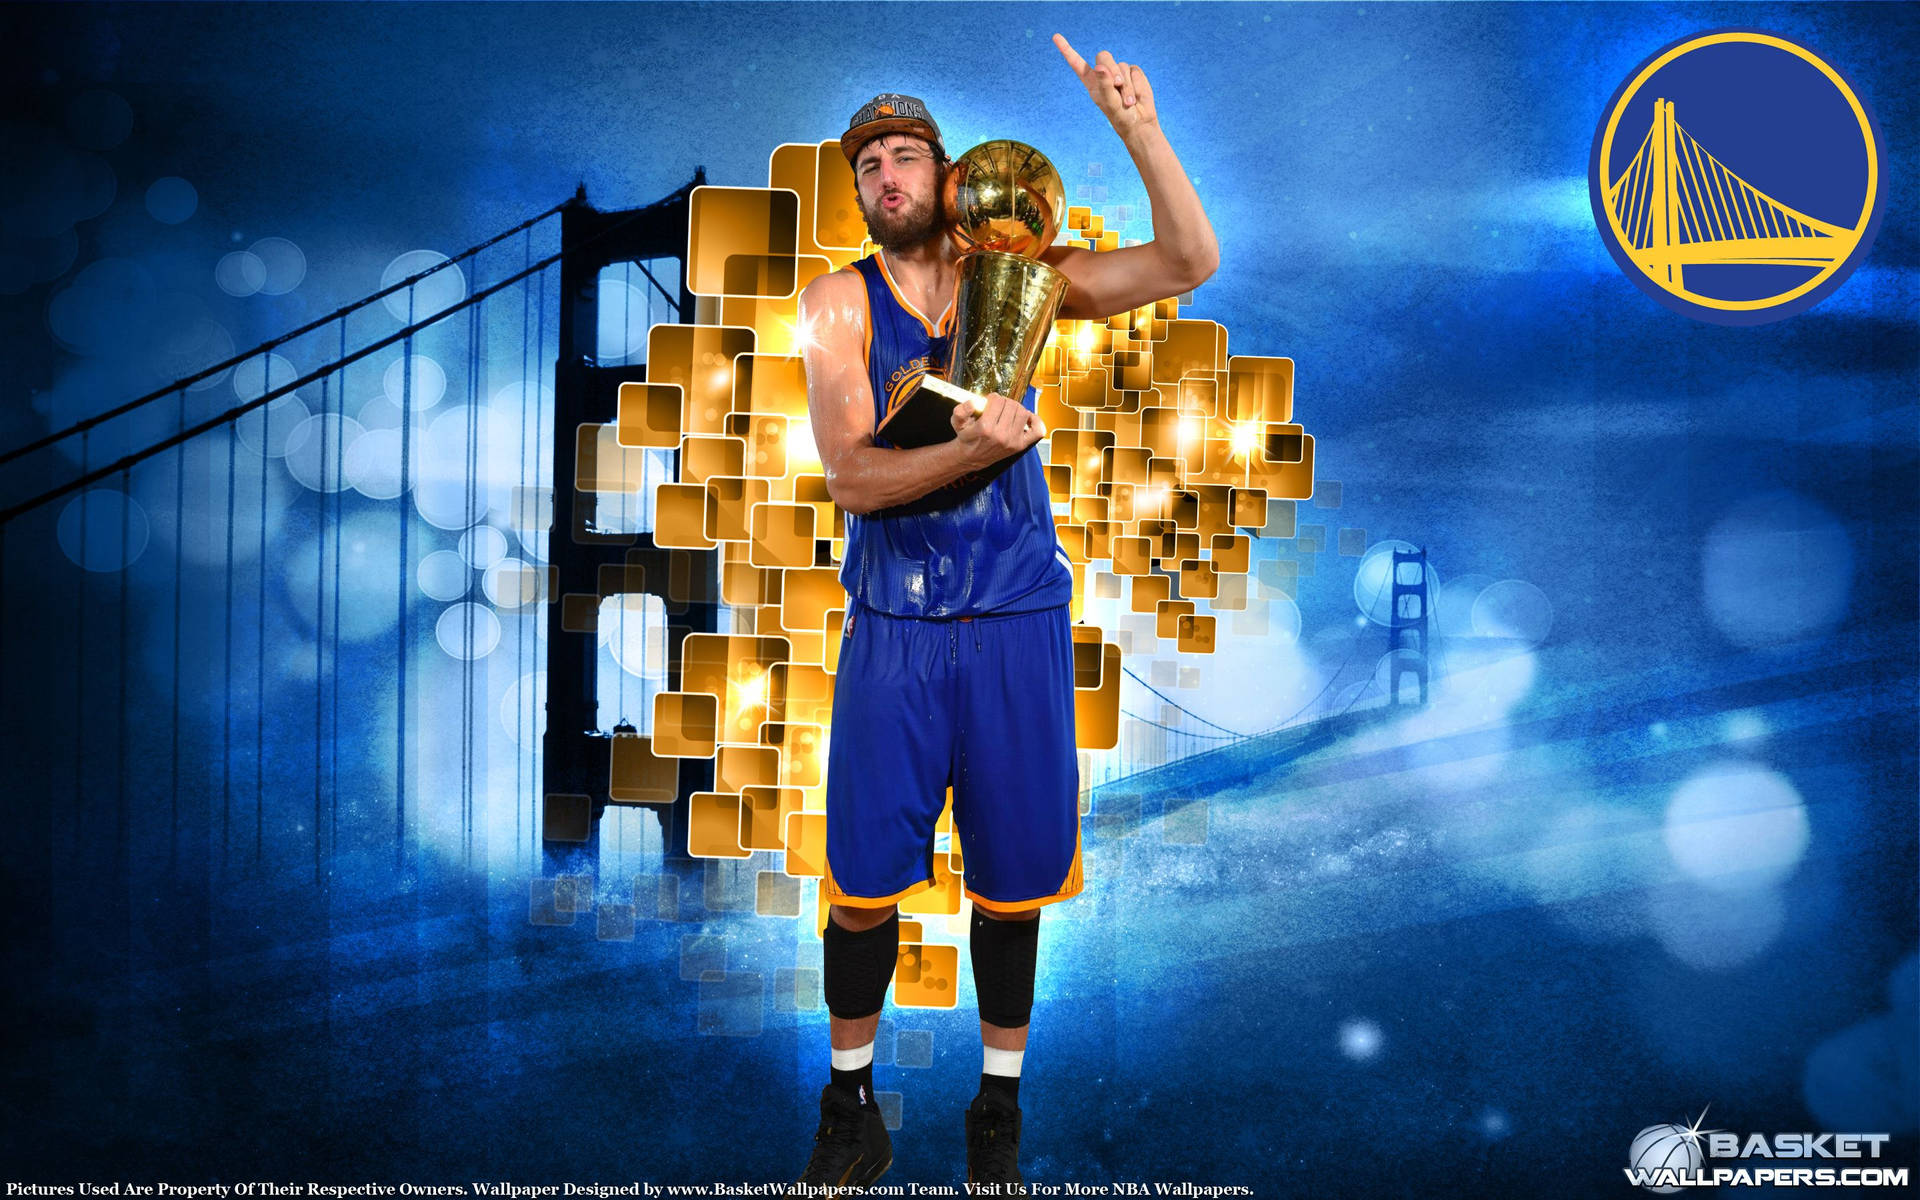 Golden State Warriors' Klay Thompson Poster Background